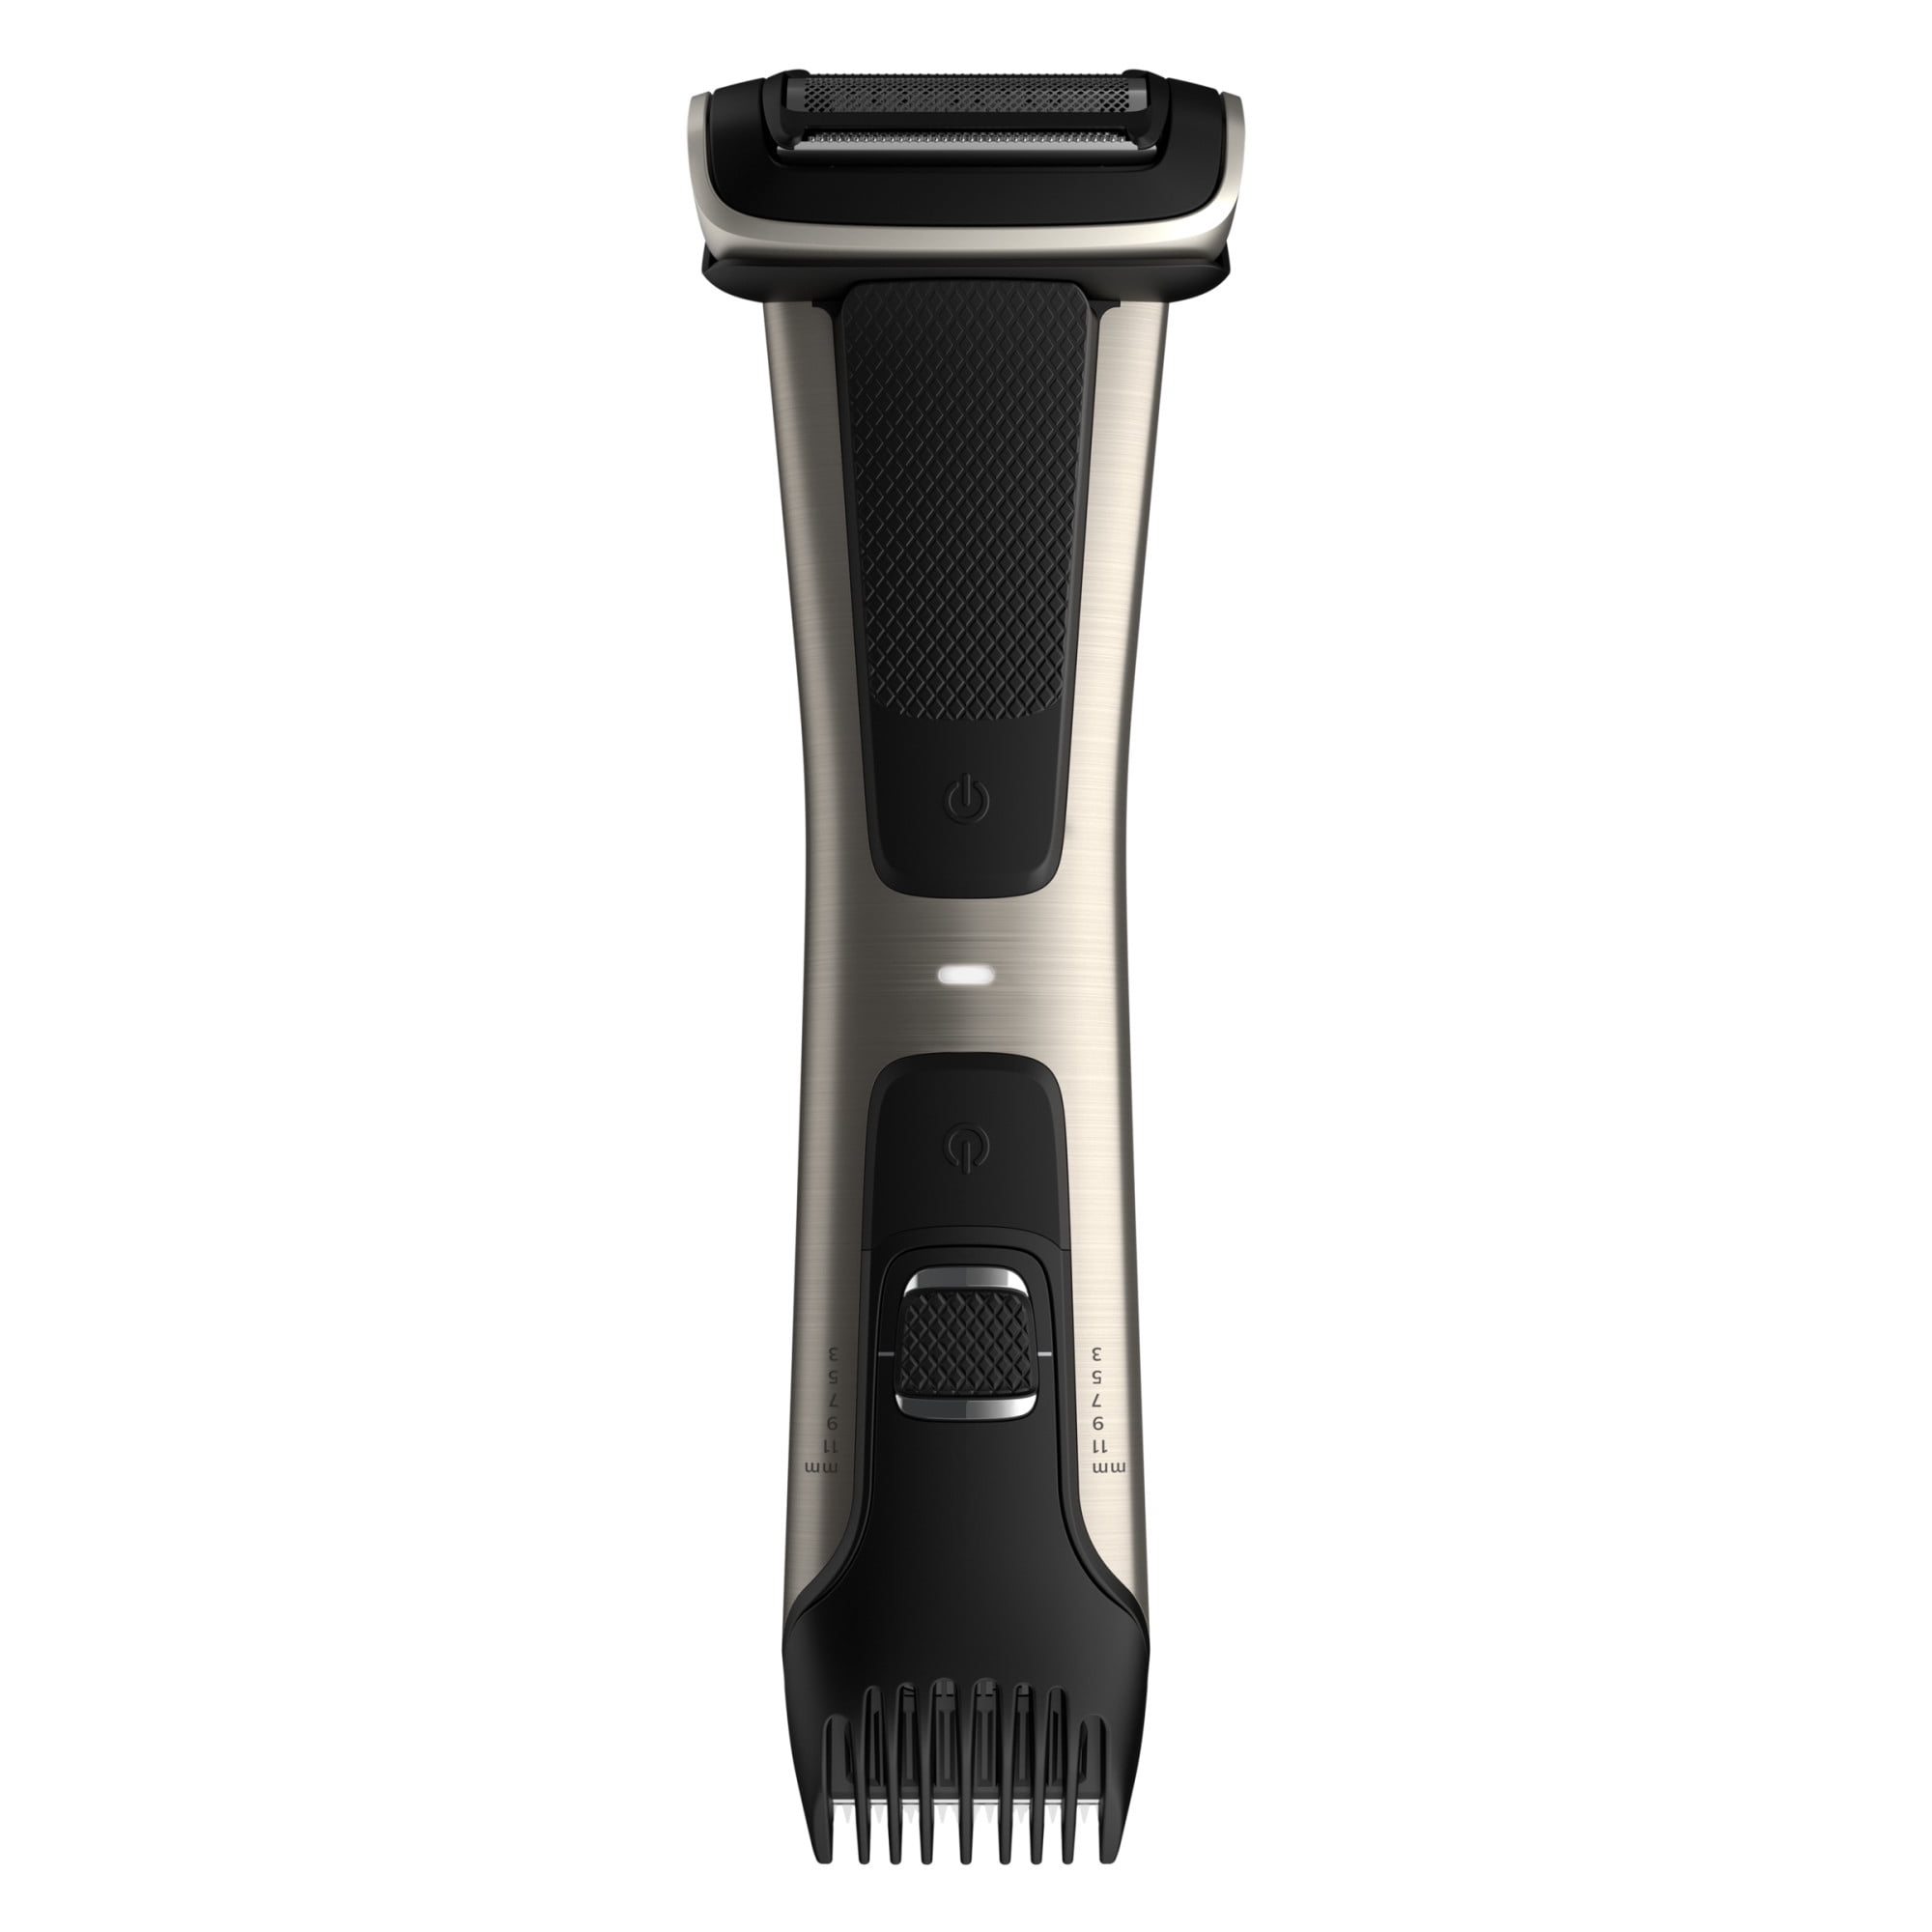 Philips Norelco Bodygroom Series 7000 Showerproof Body & Manscaping Trimmer  & Shaver, For Above and Below The Belt BG7030/49